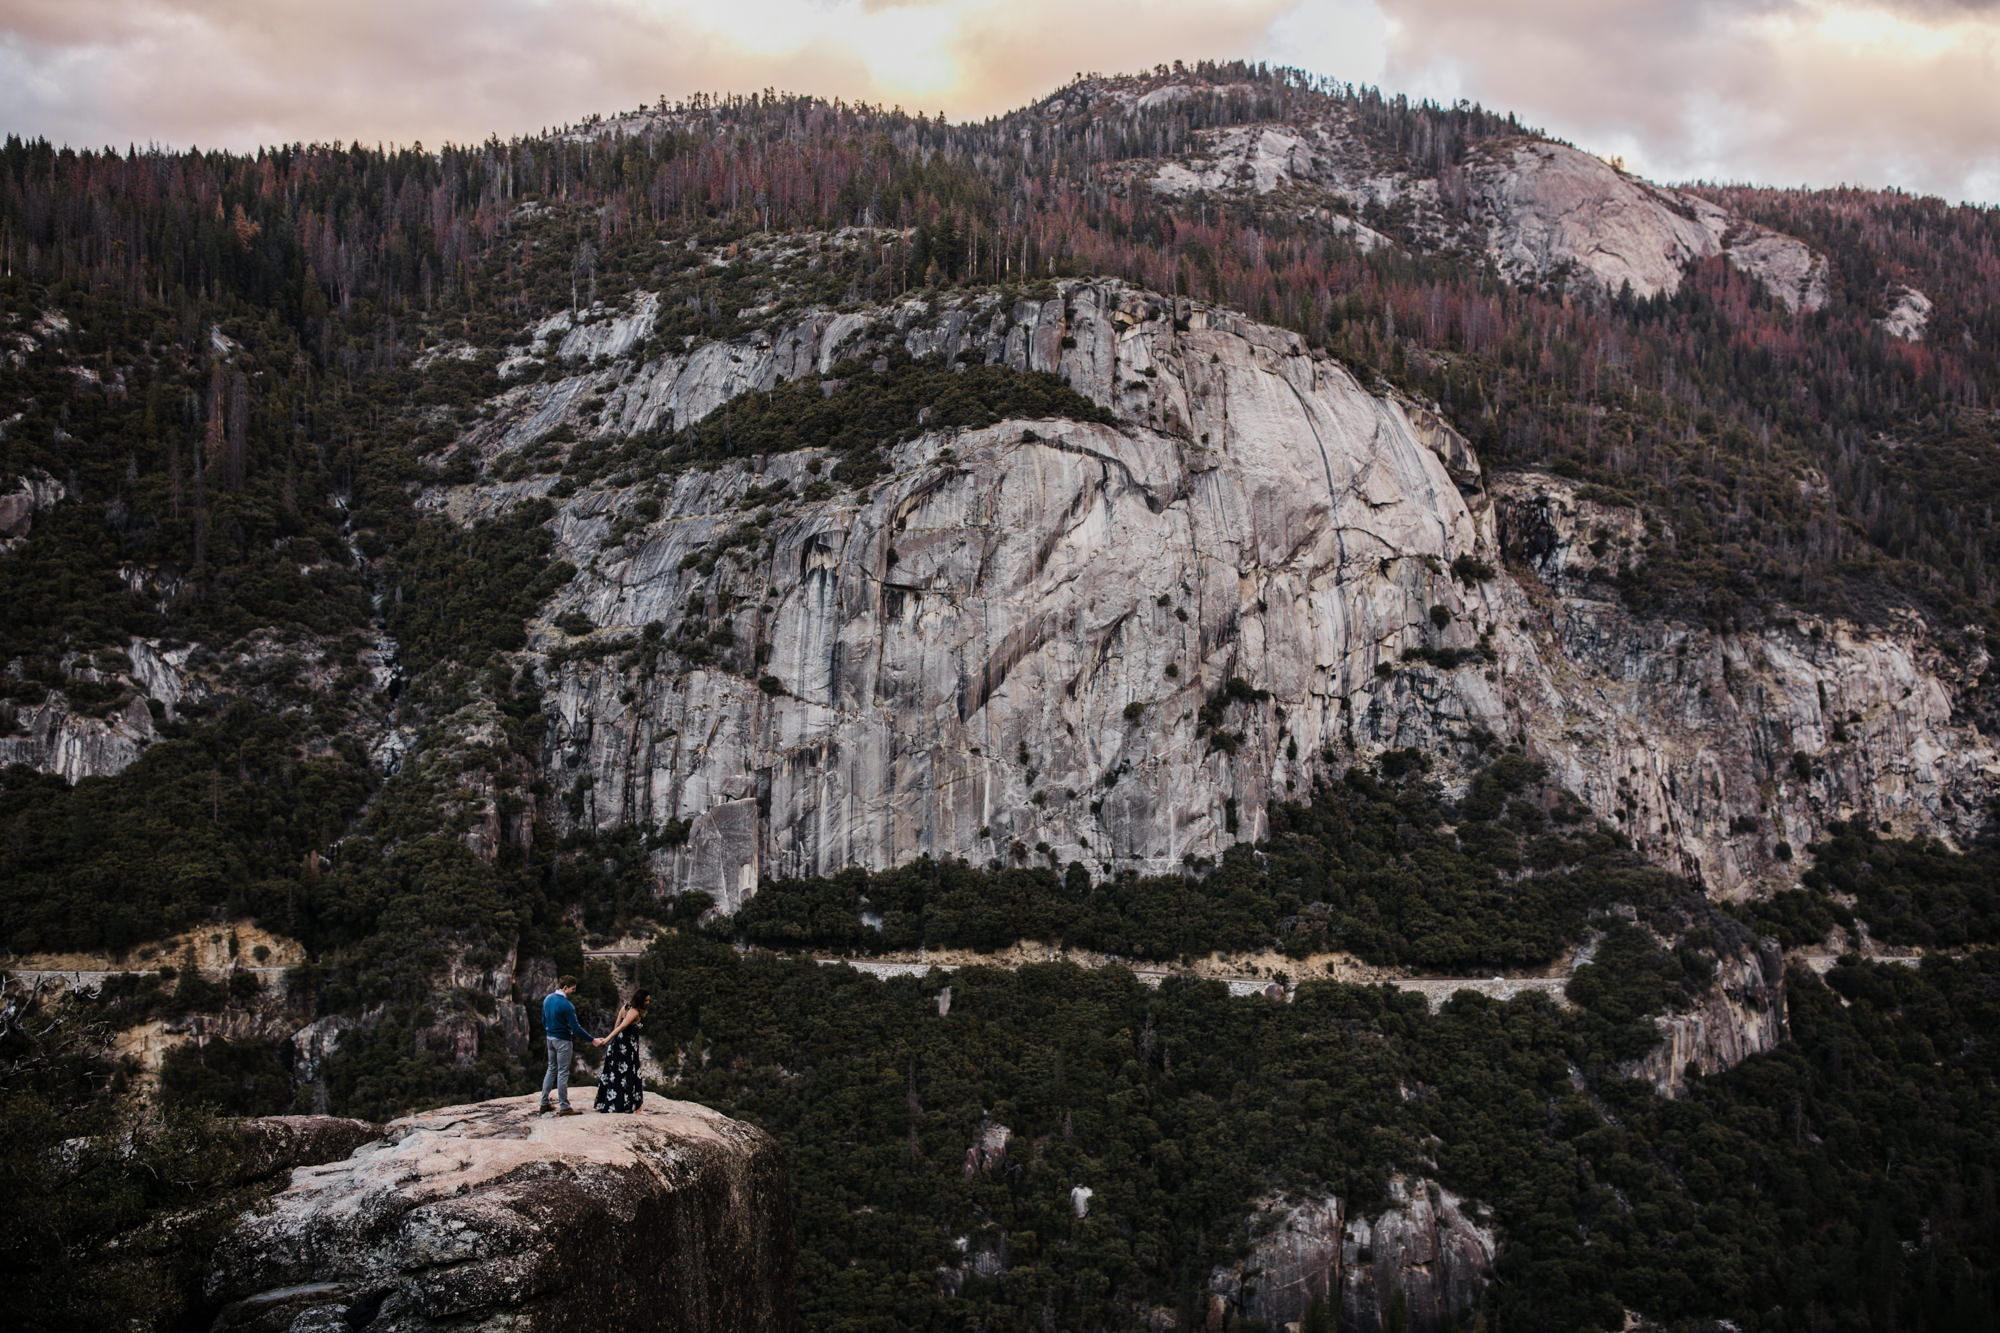 mountain top engagement session in yosemite national park | adventurous destination wedding photographer | the hearnes adventure photography | www.thehearnes.com